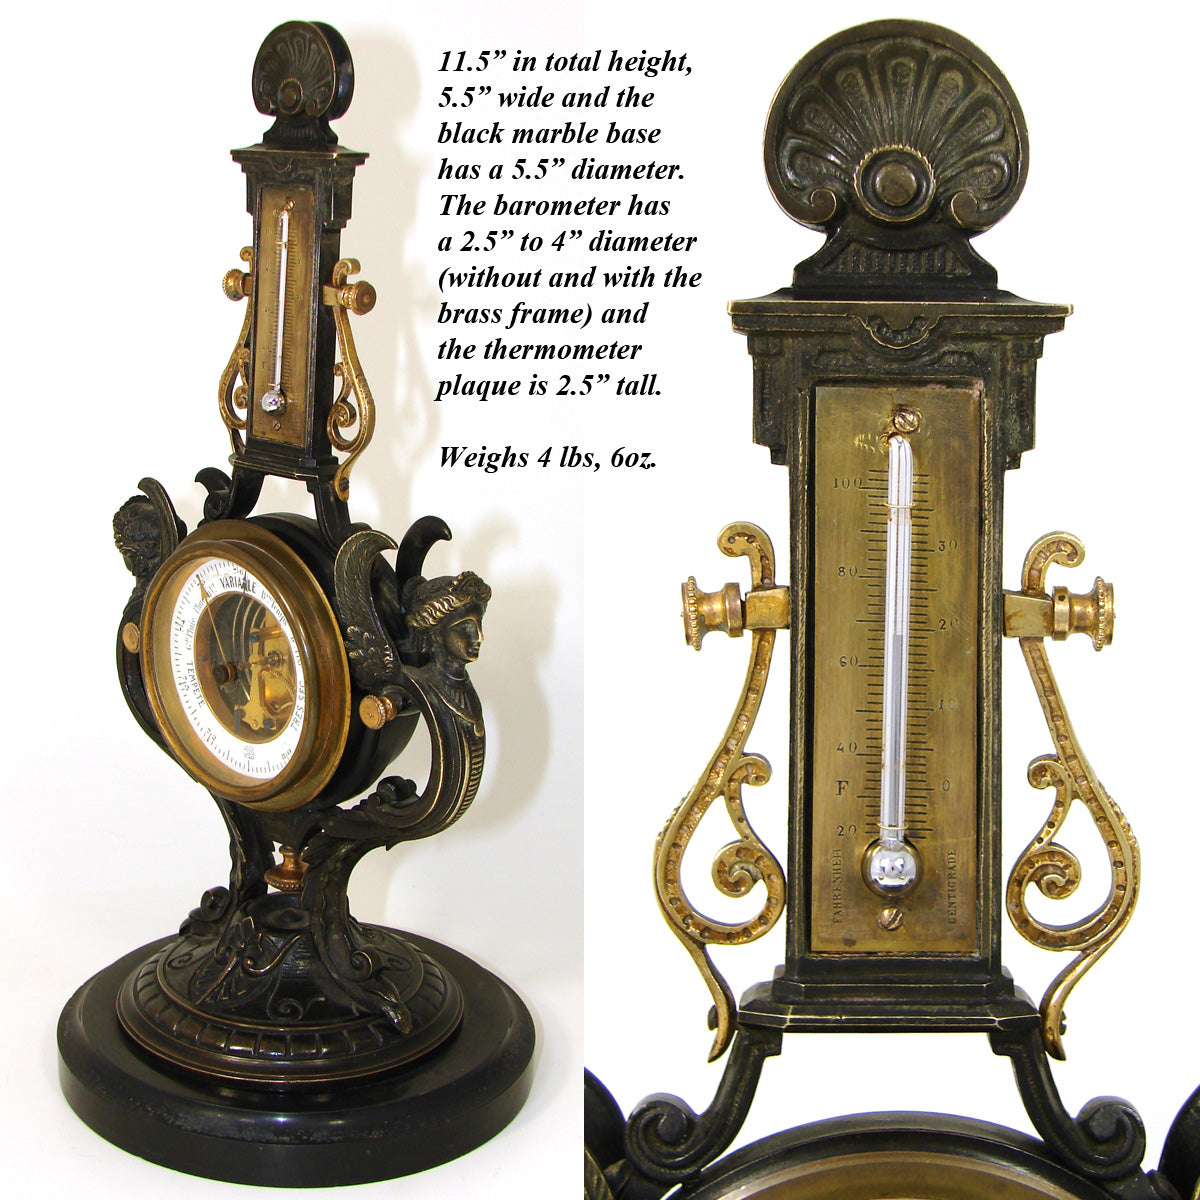 Antique French Napoleon III Era Bronze 11.5" Barometer & Thermometer Stand, Winged Figures